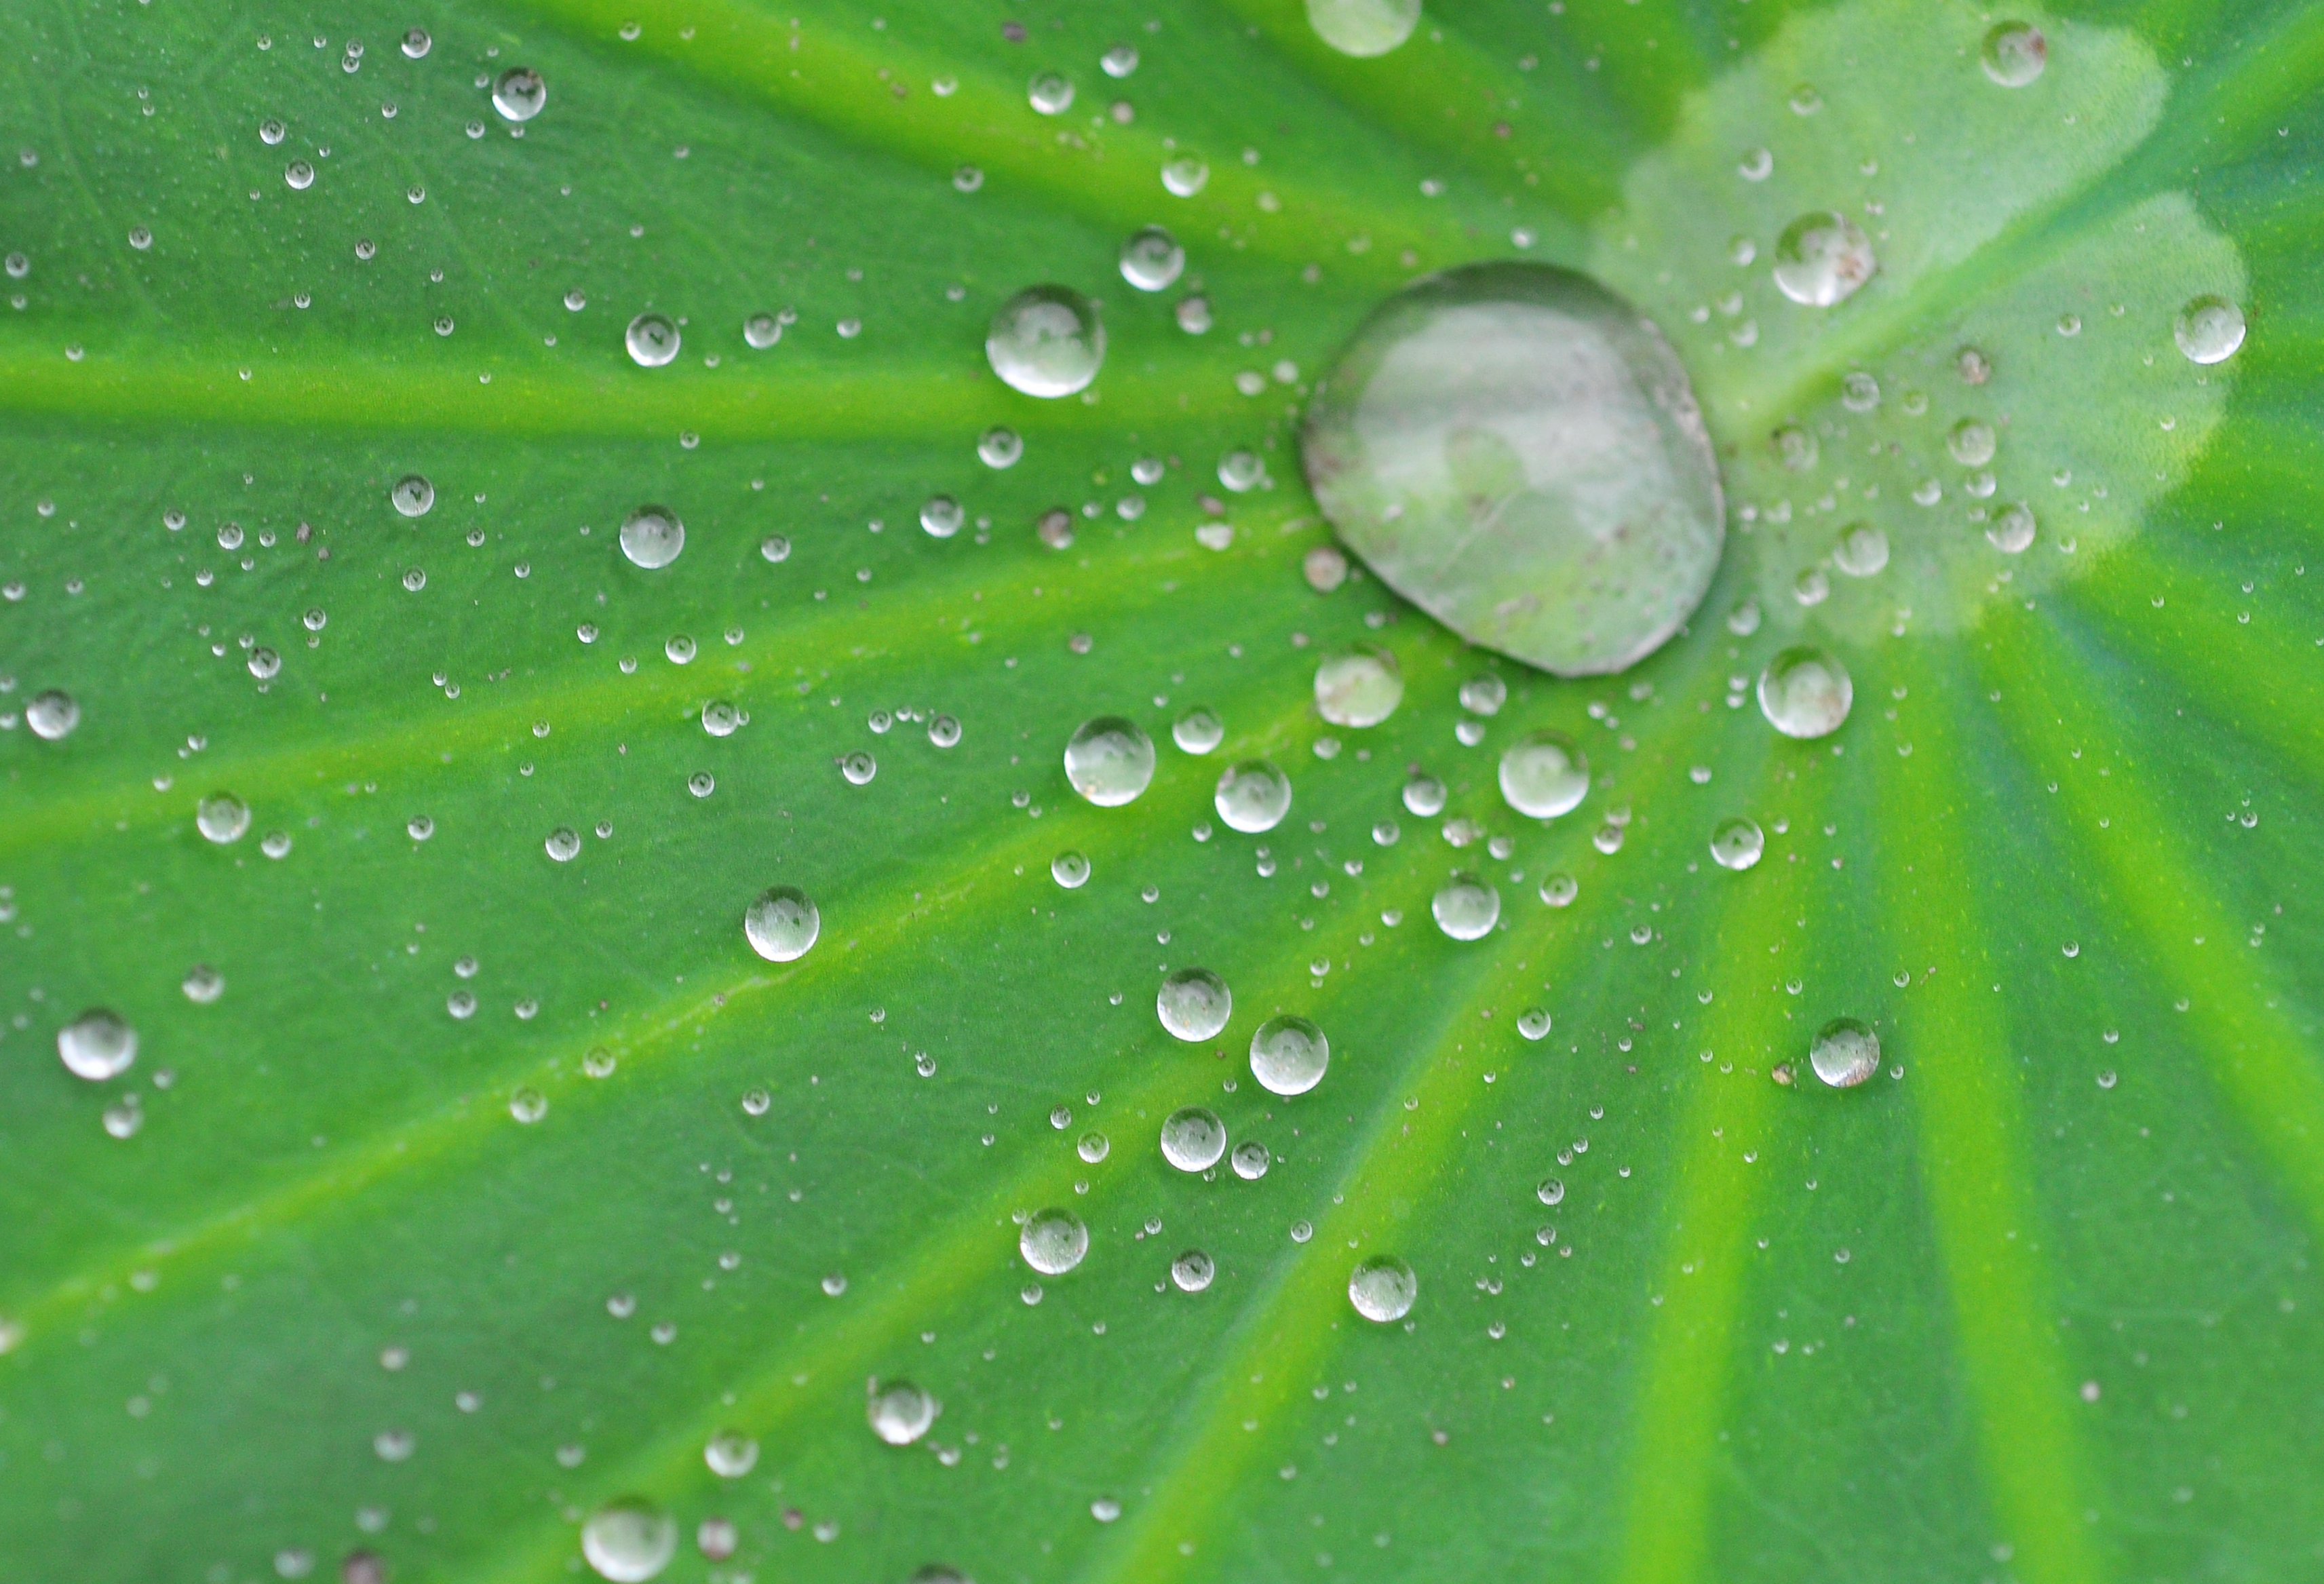 imgx%2Fenvironment%2Fwater%2Fenvironment water droplets on leaf